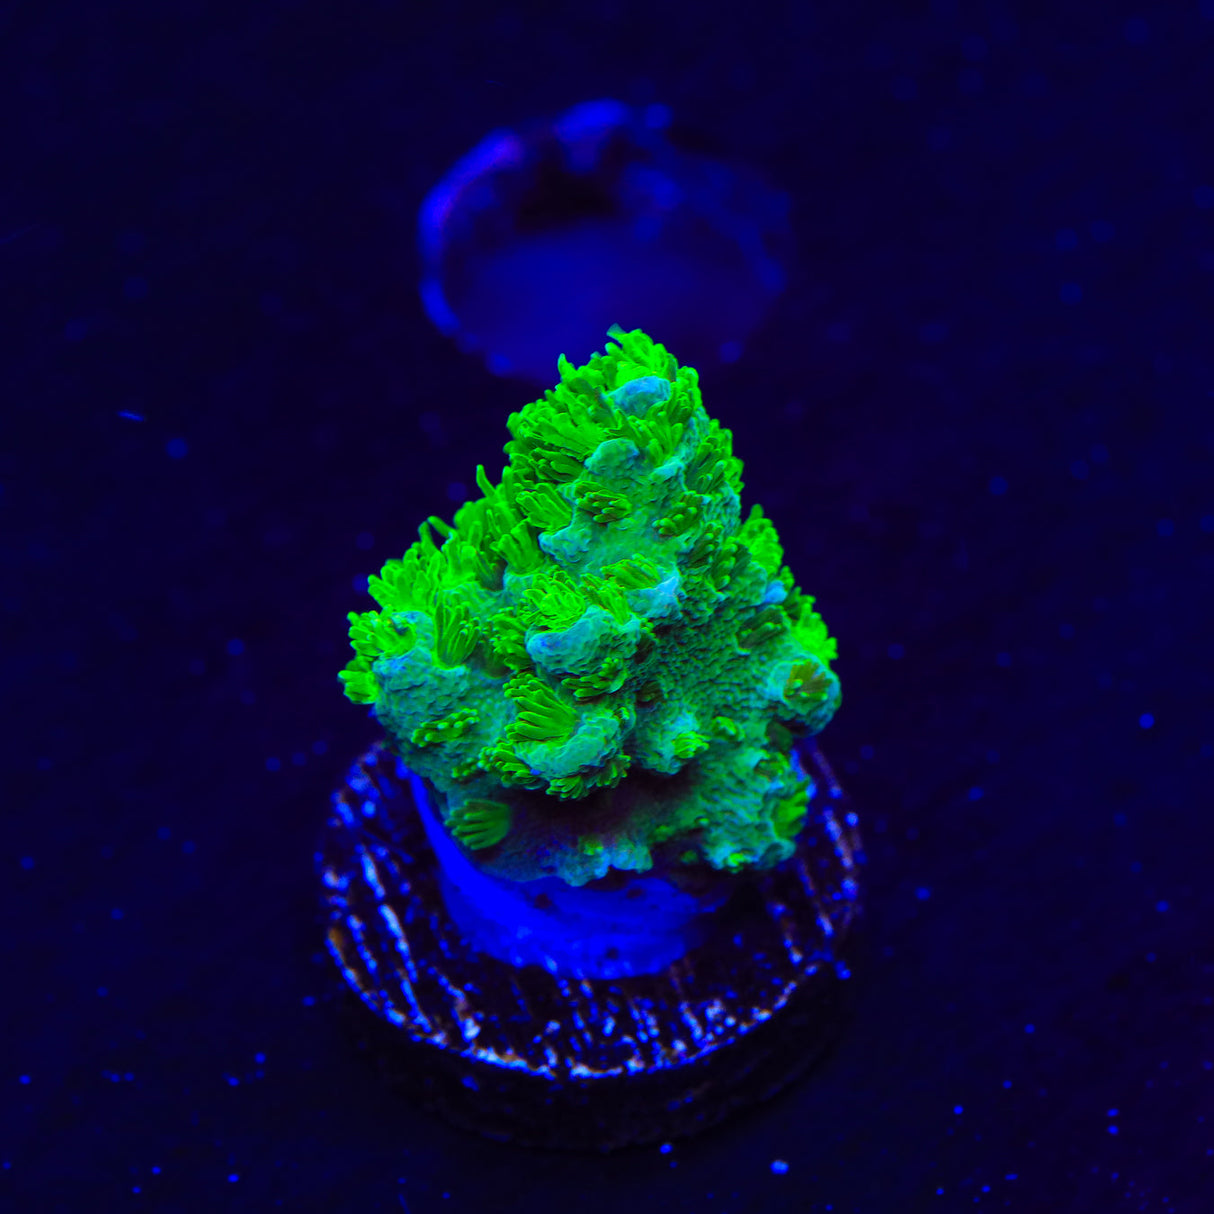 Neon Green Branching Hydnophora Coral